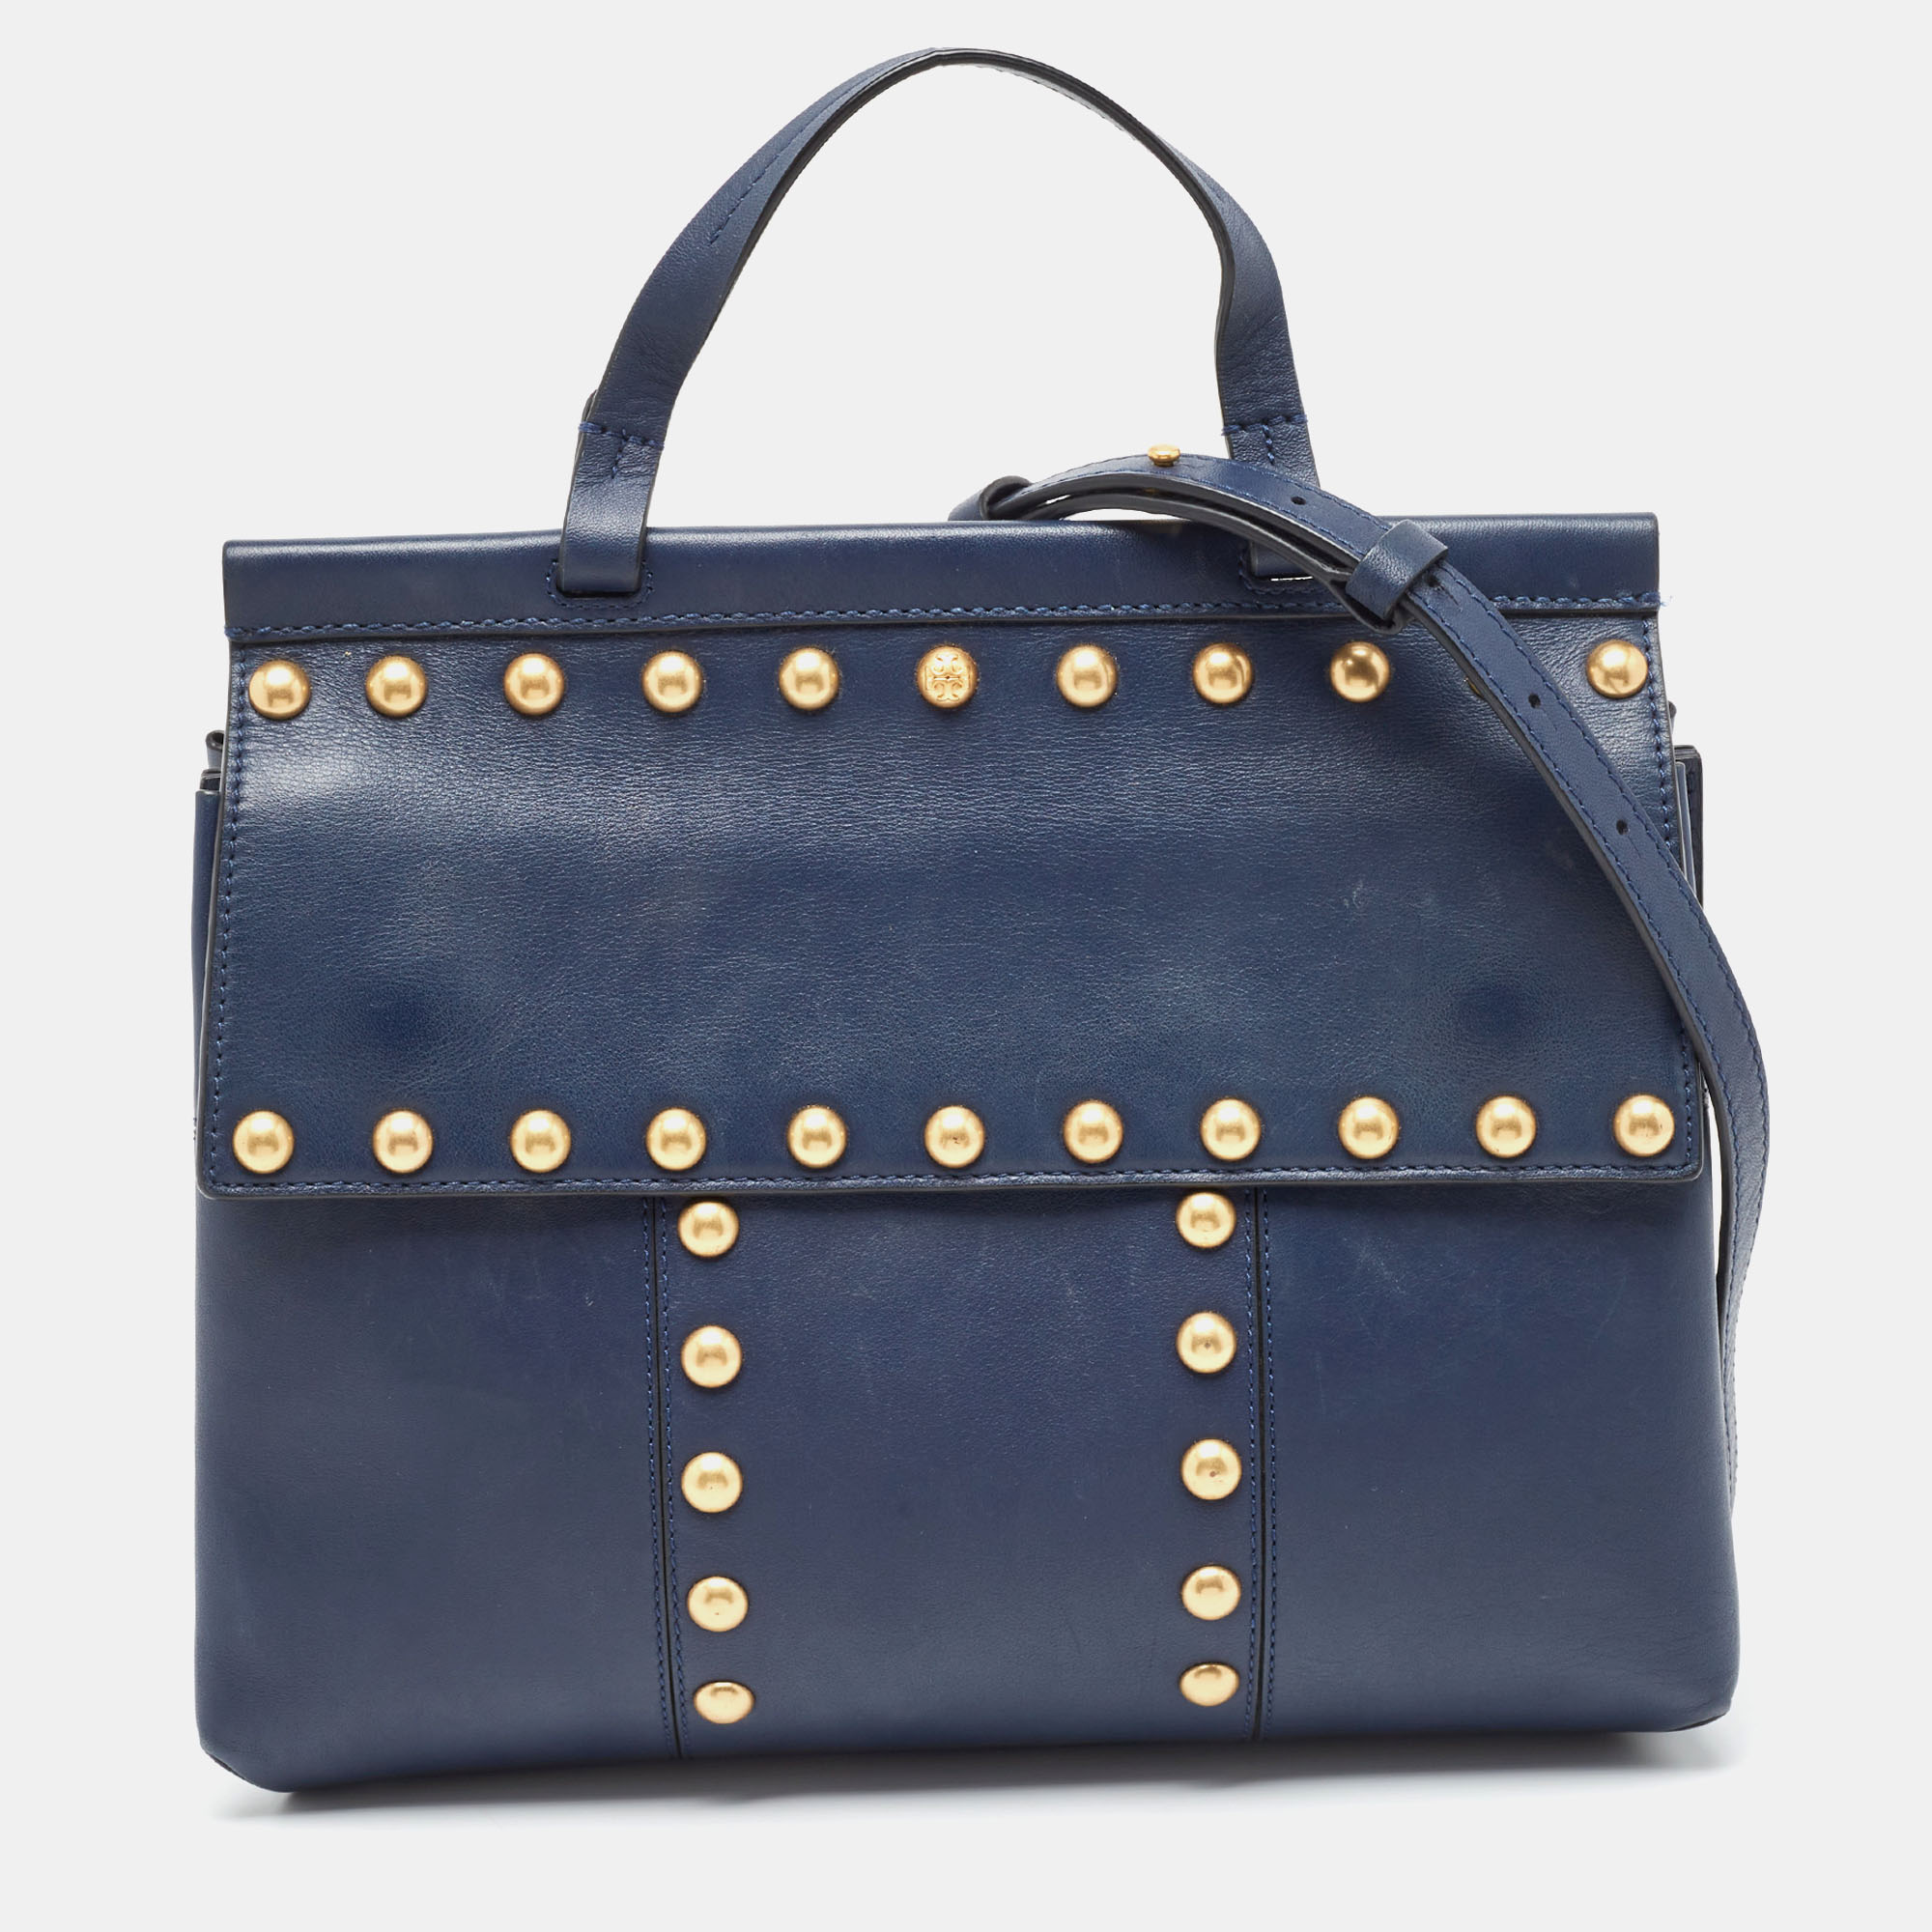 Pre-owned Tory Burch Navy Blue Leather Block-t Studded Top Handle Bag